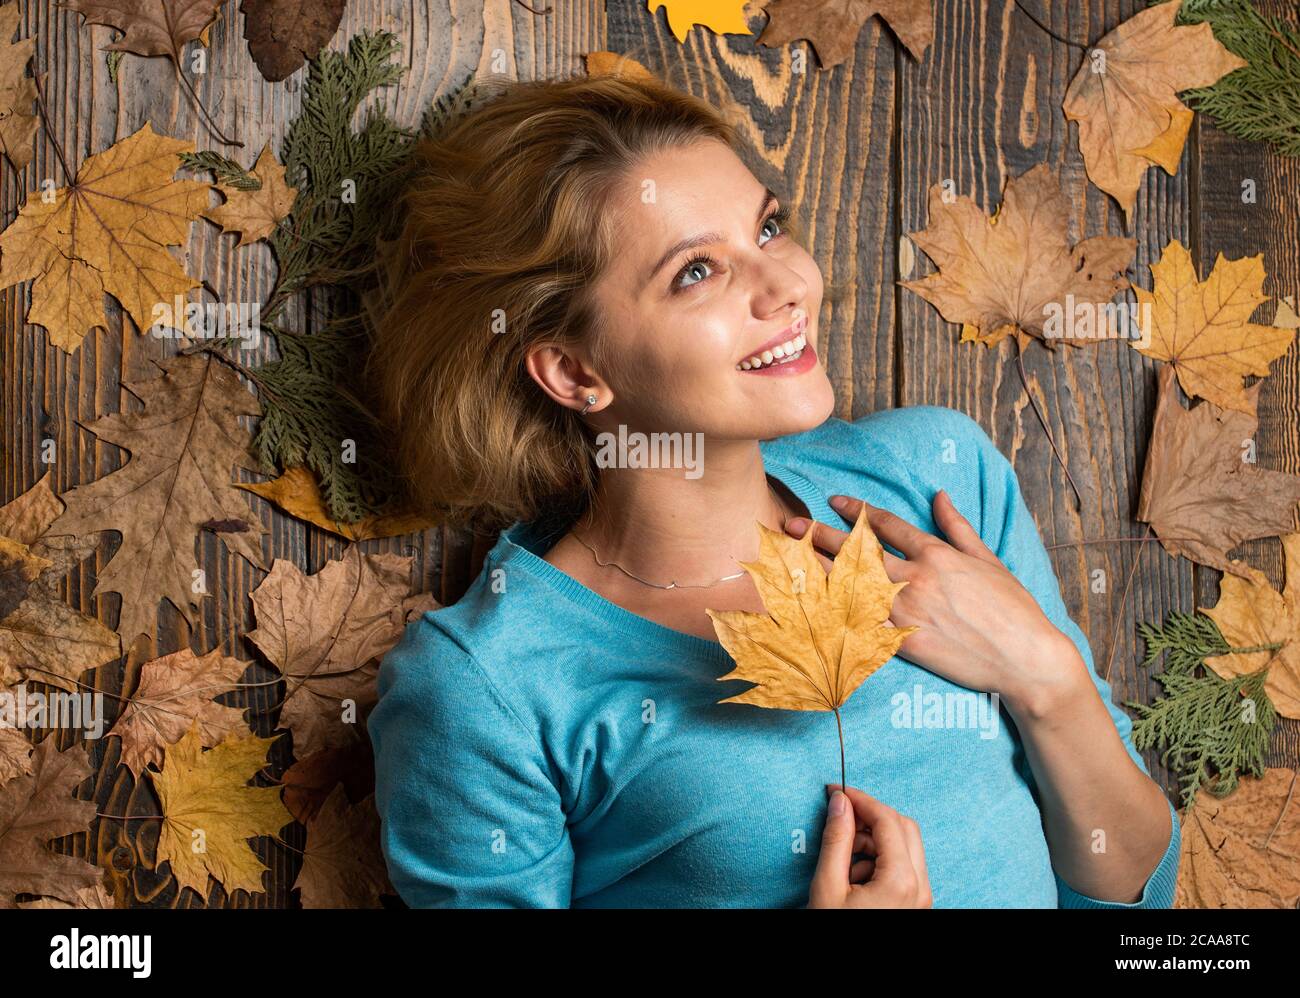 Happy Woman Enjoying Life in the Autumn on the Nature Stock Photo